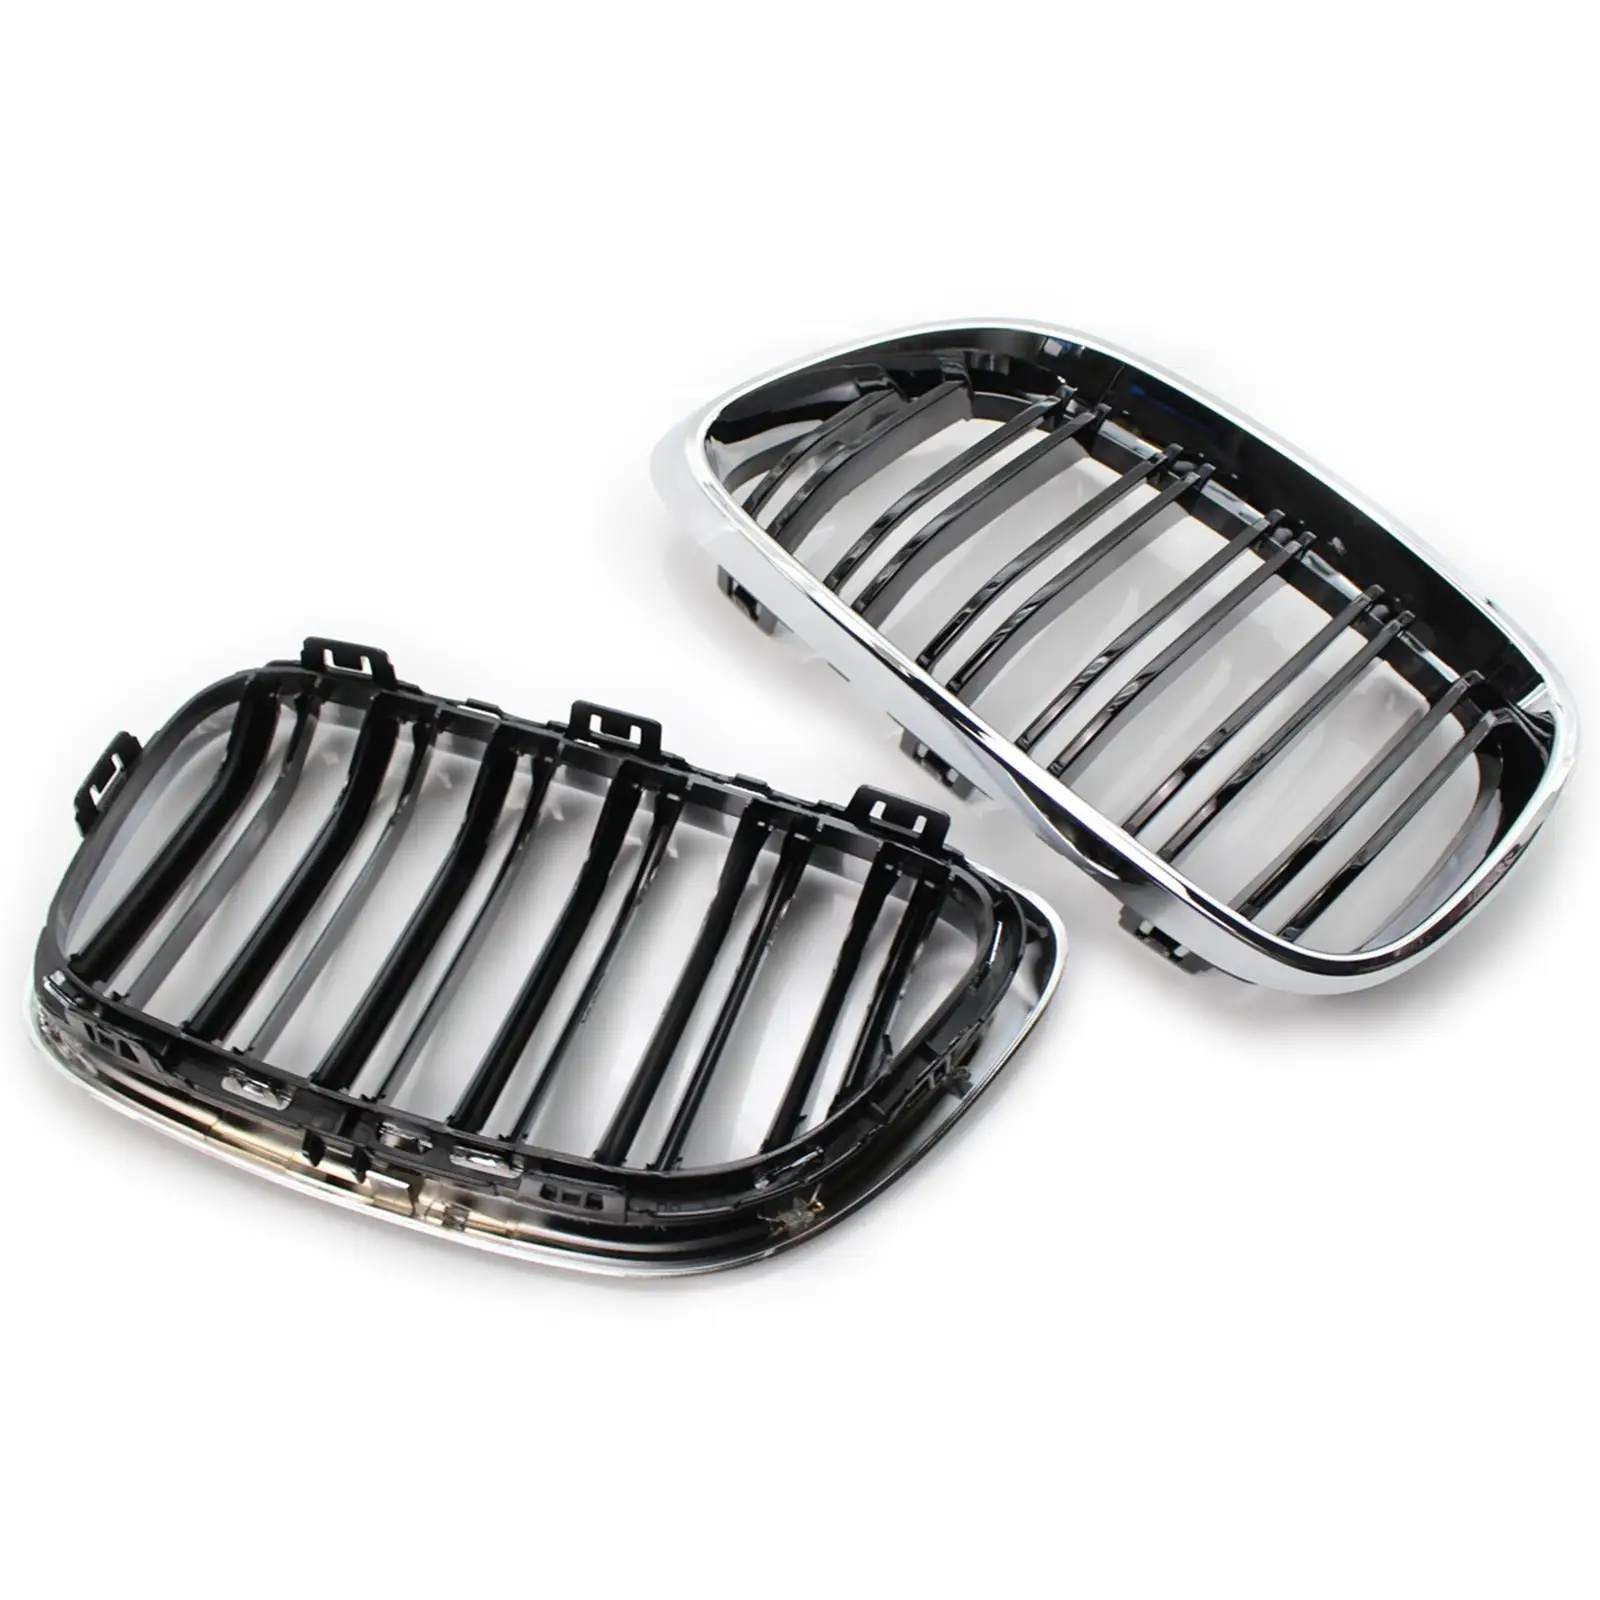  51137295524 Dual Slat Front Grilles Car Front Grille  F23 2014-On